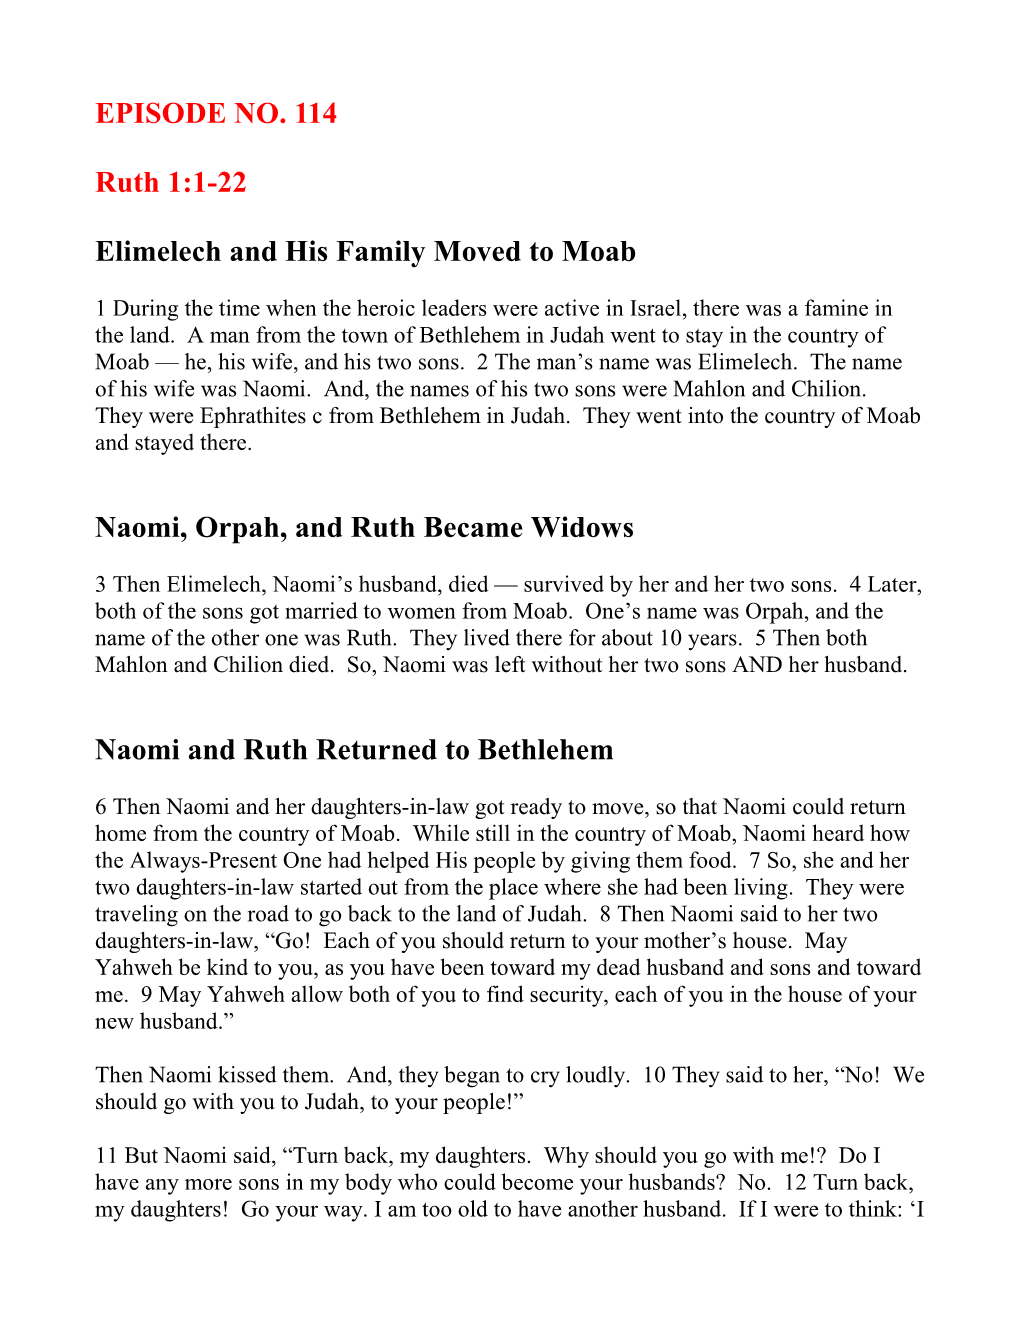 EPISODE NO. 114 Ruth 1:1-22 Elimelech and His Family Moved To